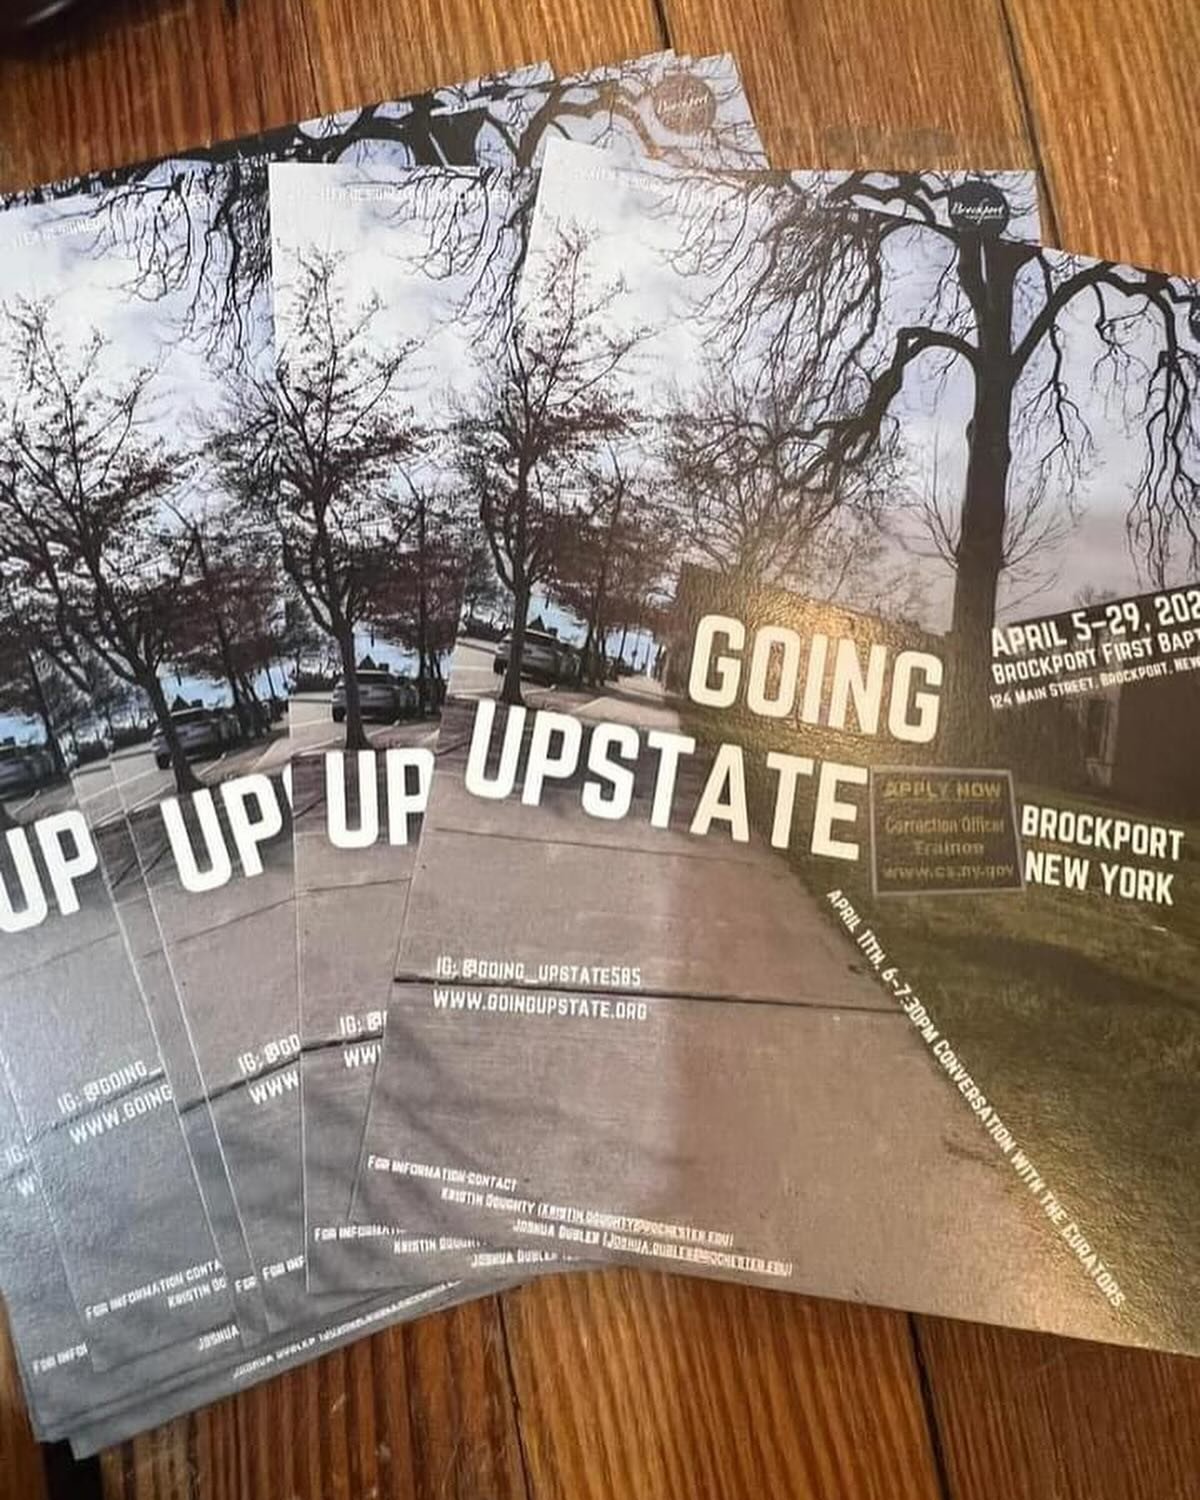 What an awesome event last night! Big thanks to the organizer and to everyone who came out for the Q+A. The GOING UPSTATE exhibit will be housed at our church through the end of the month. Come by sometime and check it out!